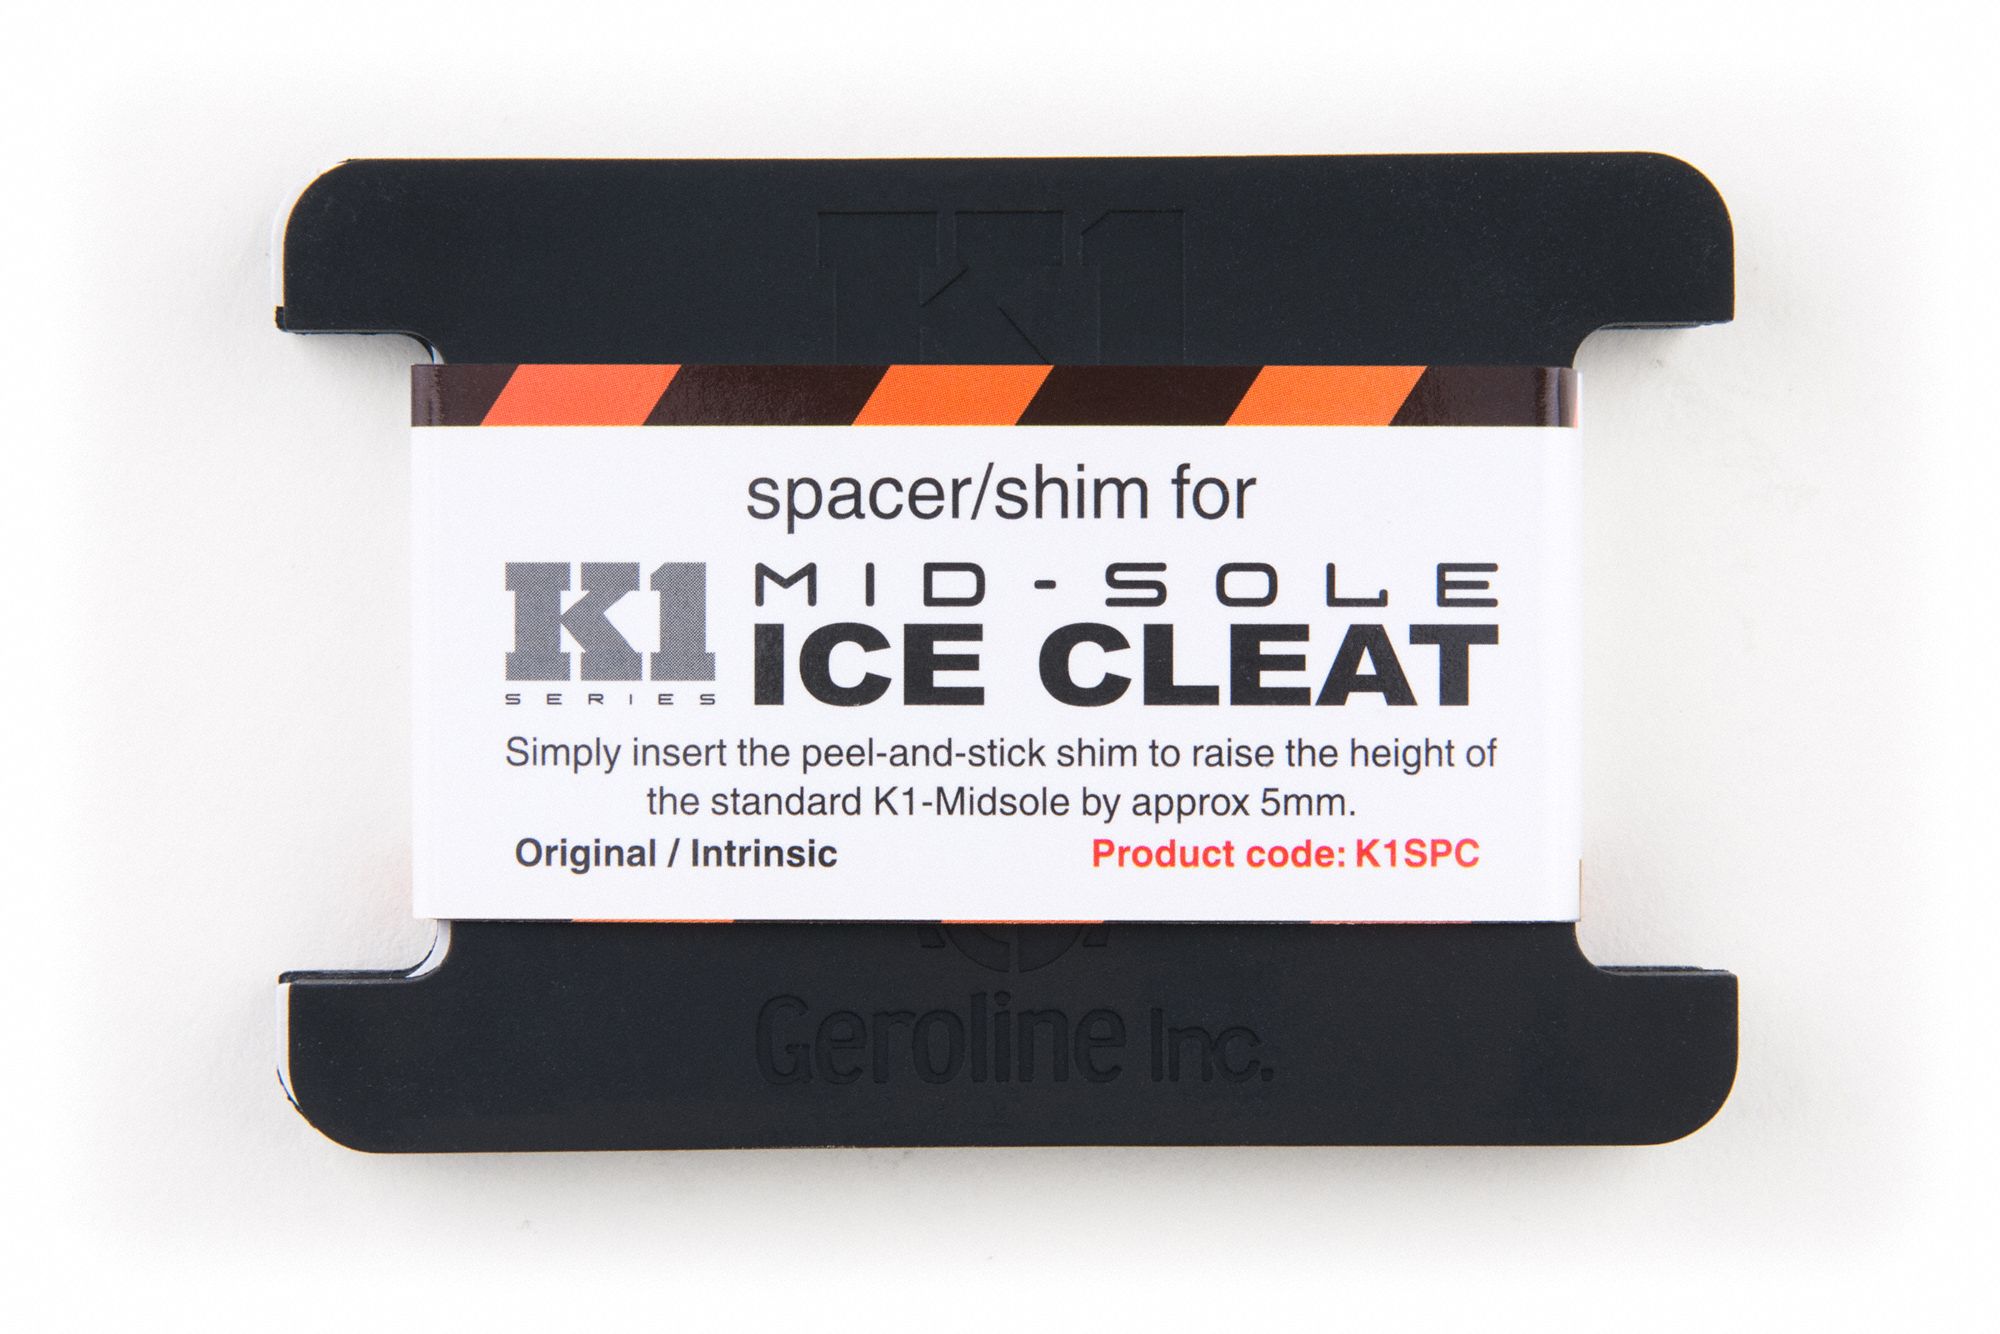 Ice Cleat Spacer: Mid-Sole Footwear Coverage, Rubber, 3 in L x 2-1/8 in W x 1/4 in H, Black, 1 PR